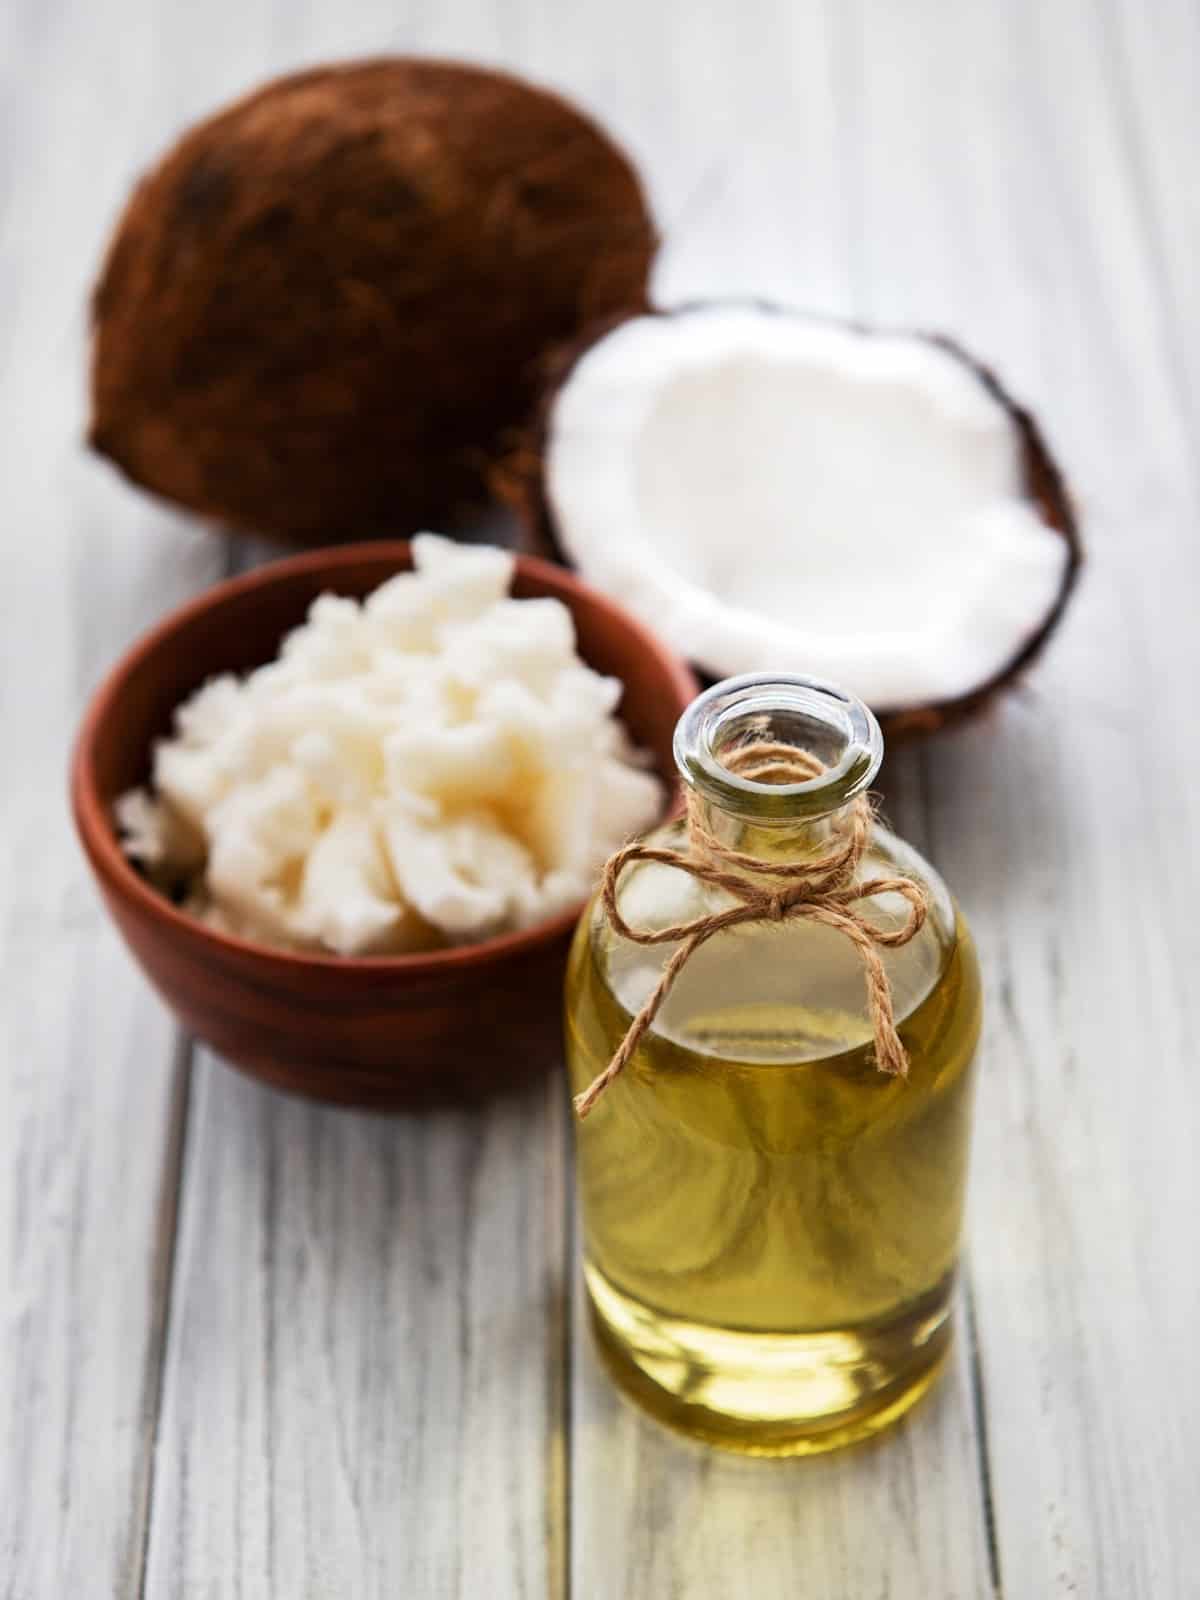 coconut extract in a glass jar